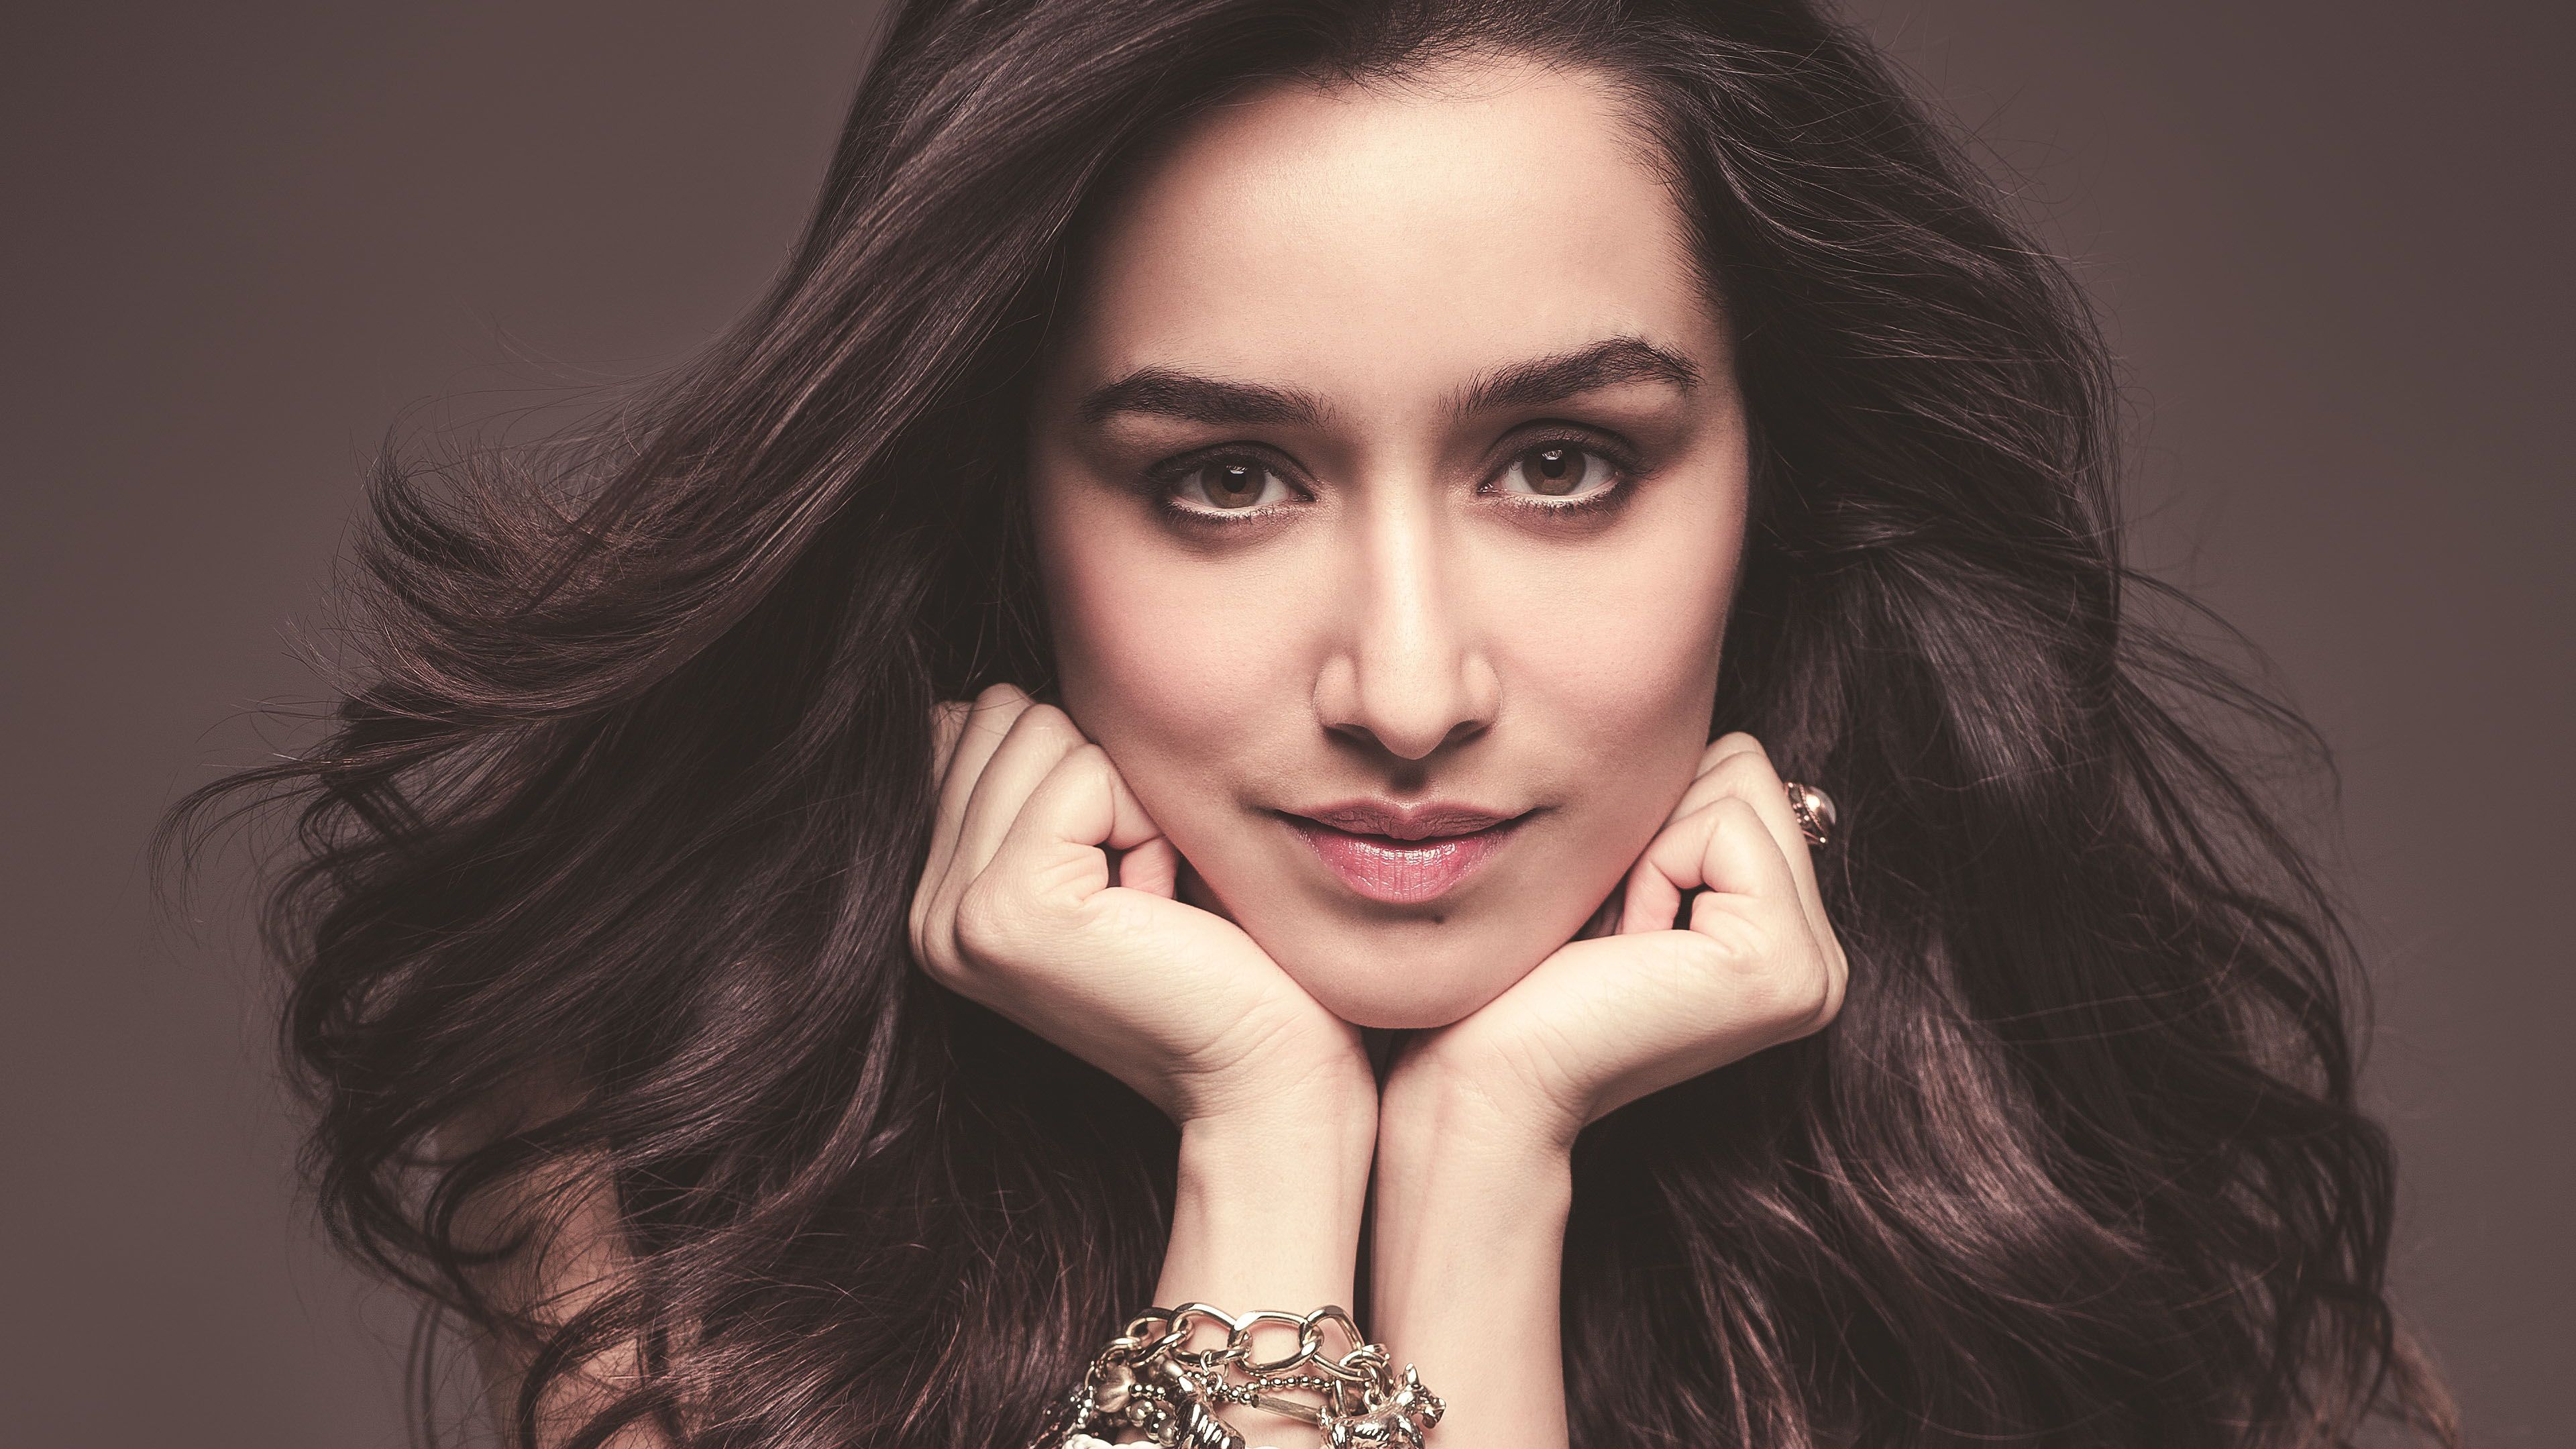 Desktop Wallpaper Bollywood Actress Shraddha Kapoor, HD Image, Picture, Background, Aolwtj